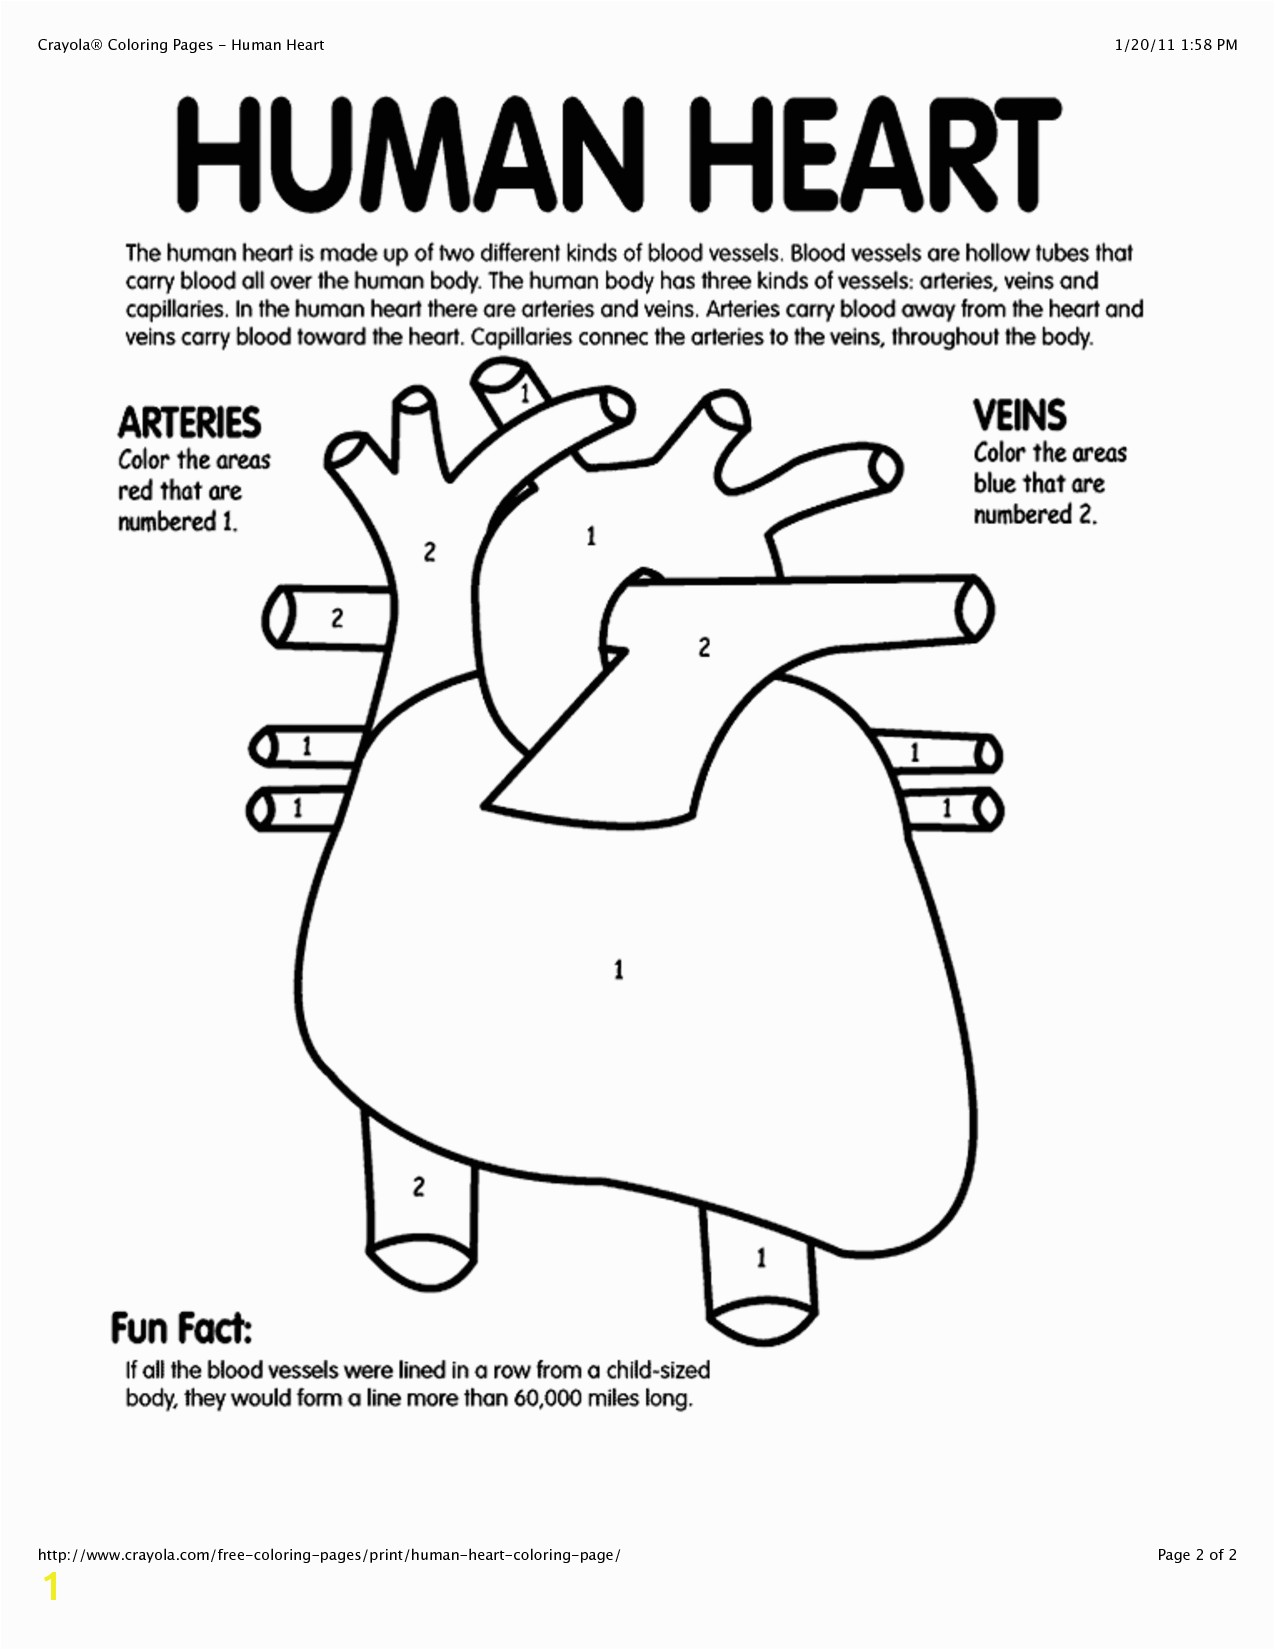 New Human Heart Coloring Pages Gallery 2 b Dazzling Design Ideas Free Anatomy Coloring